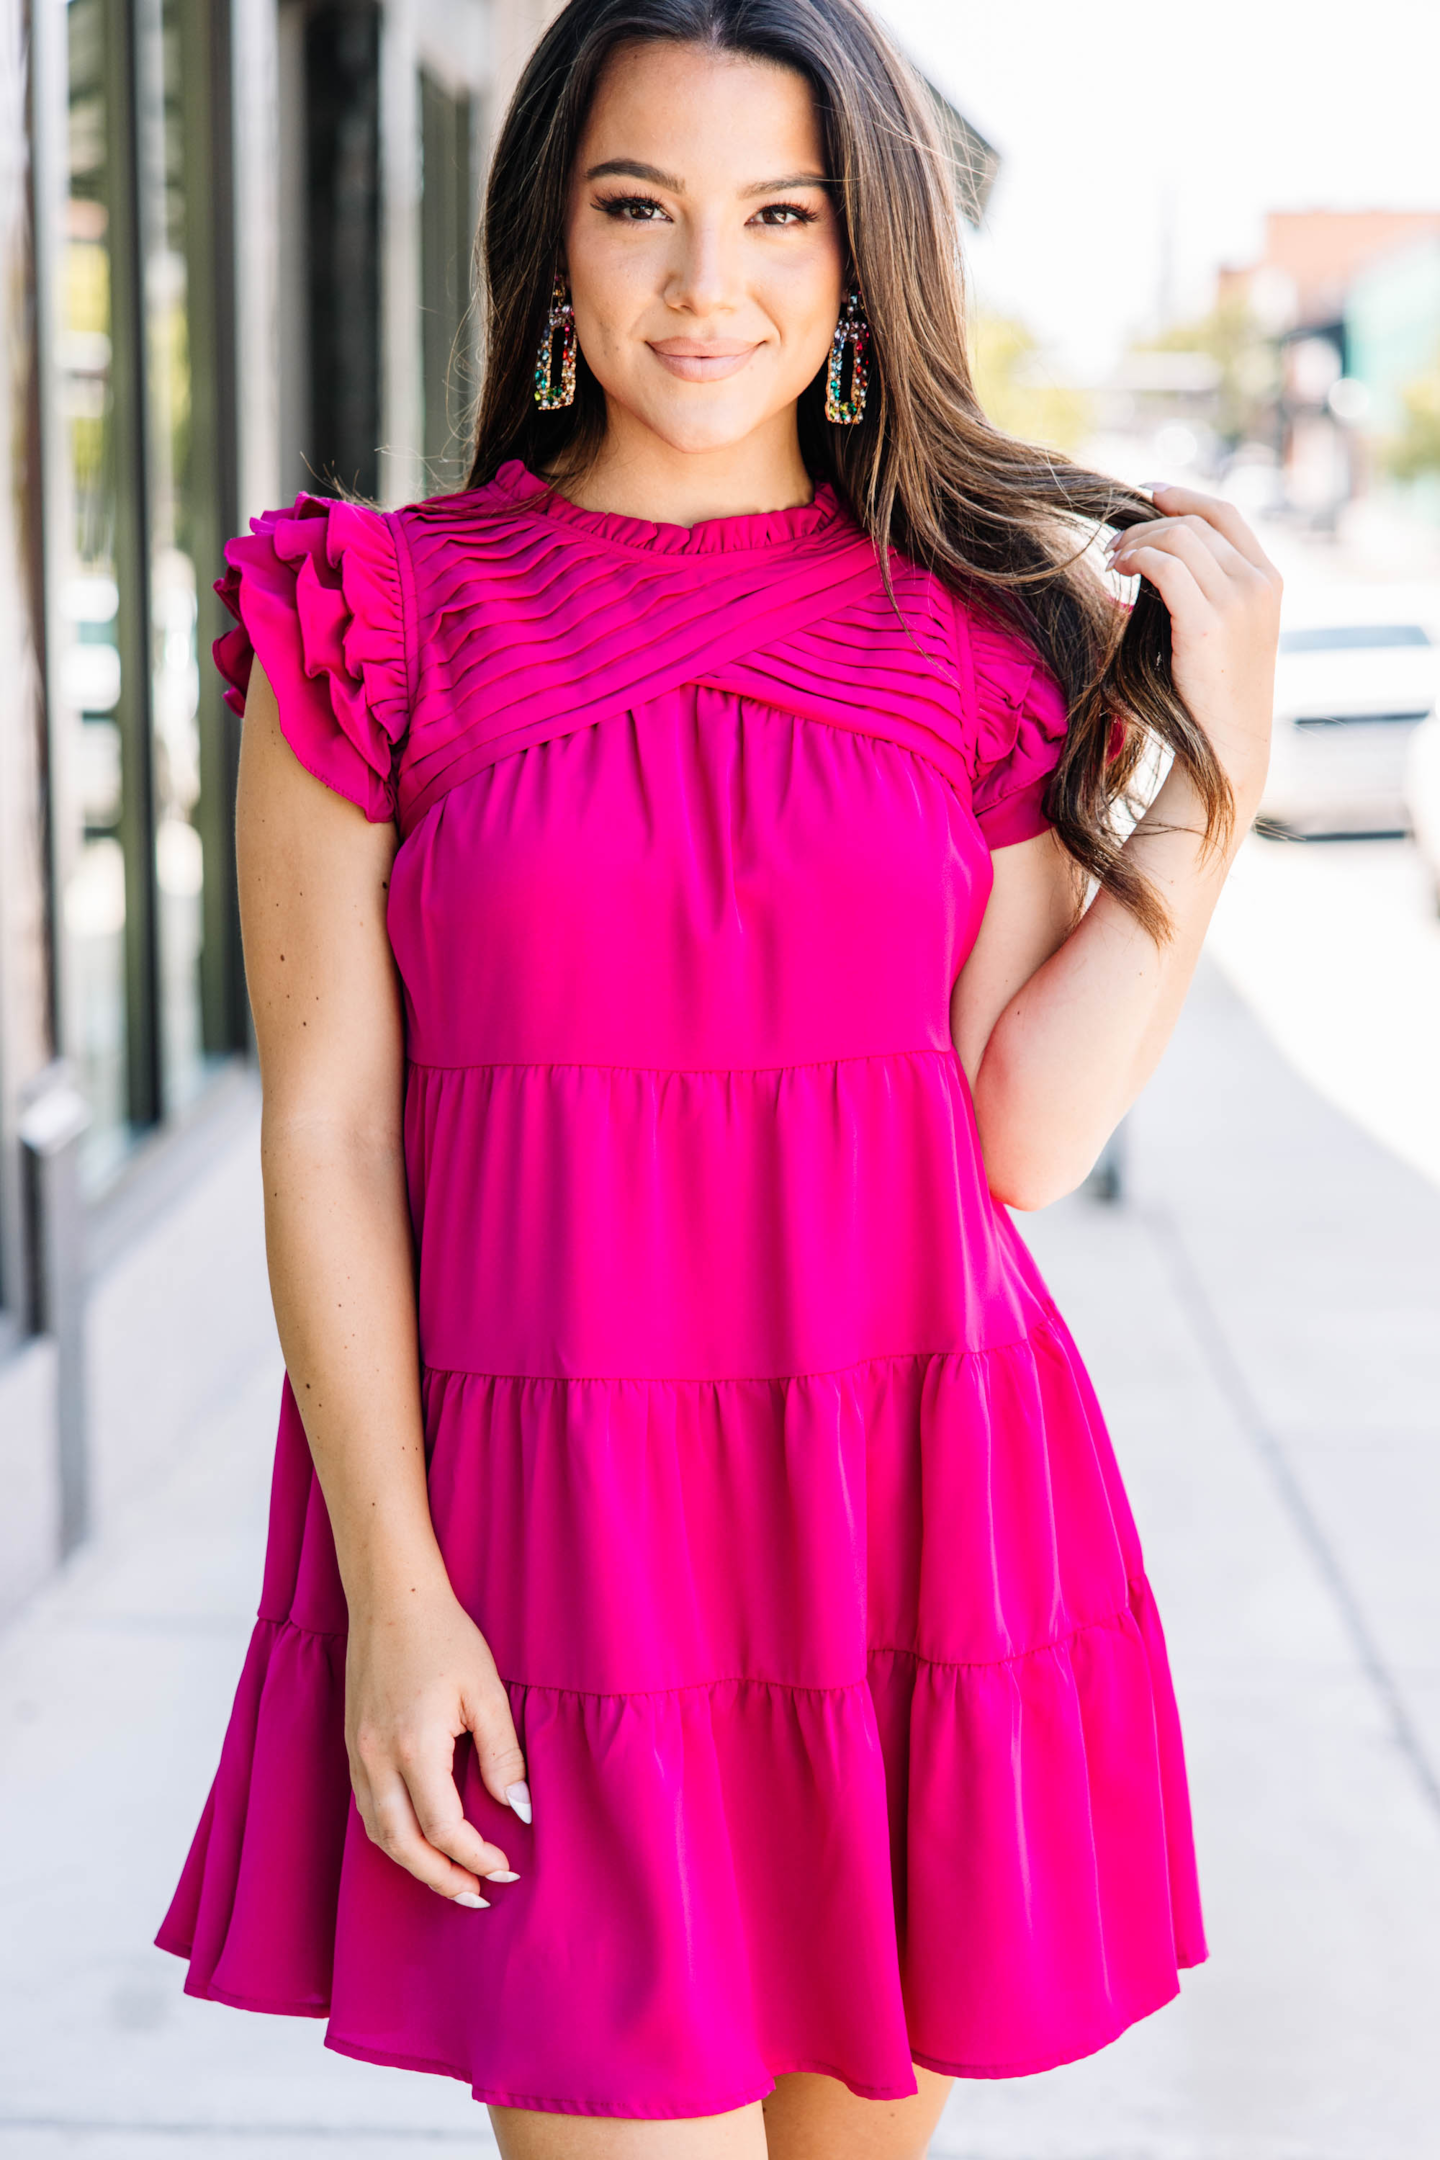 https://shopthemint.com/products/all-about-you-magenta-purple-ruffled-dress?variant=39634421579834